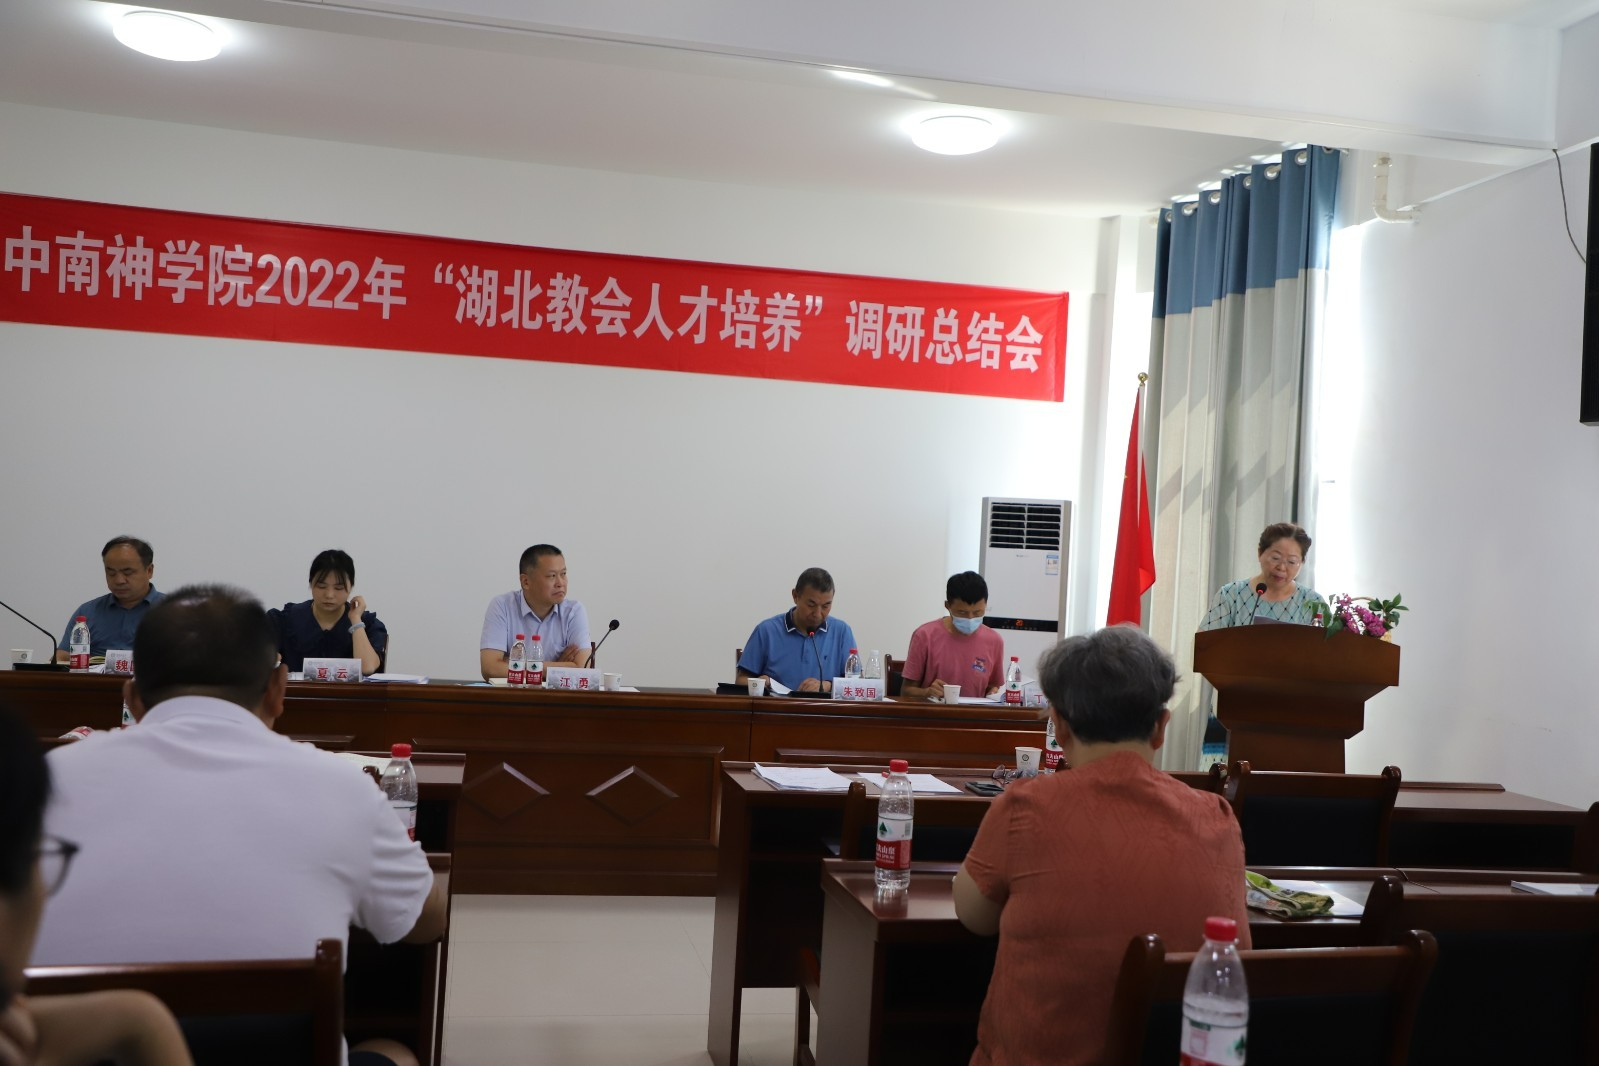 The wrap-up meeting of the research study on “Training of Christian Talents in Hubei Province” was held by Zhongnan Theological Seminary on August 8, 2022.